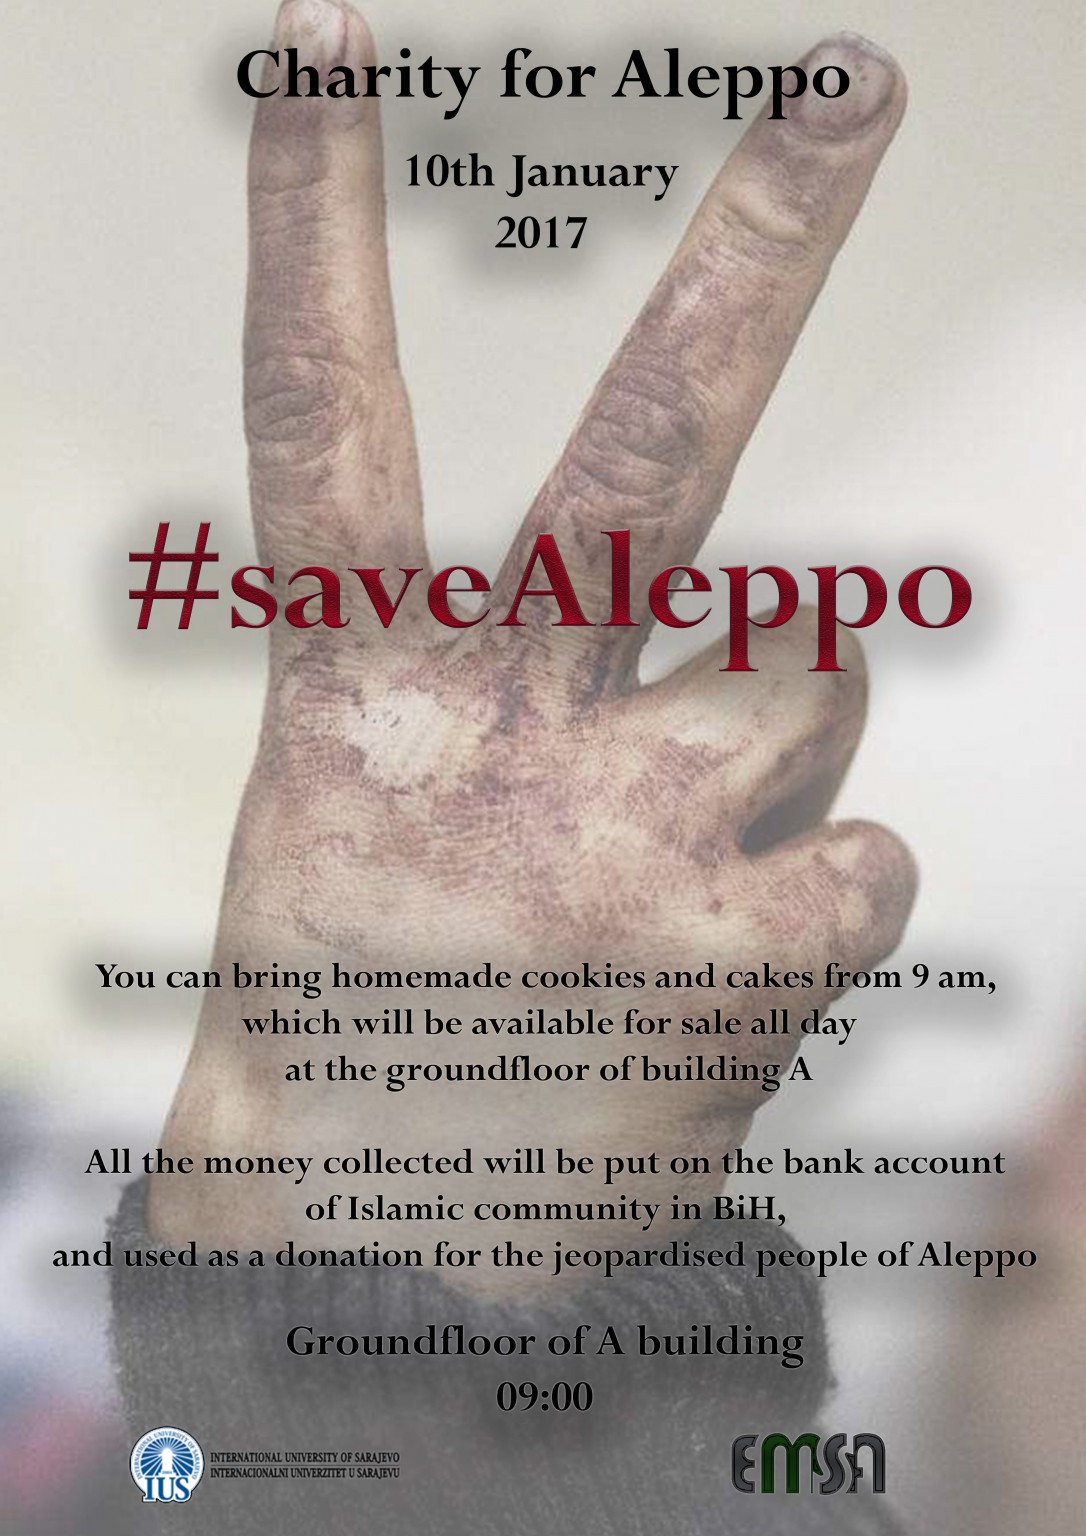  Charity for Aleppo 